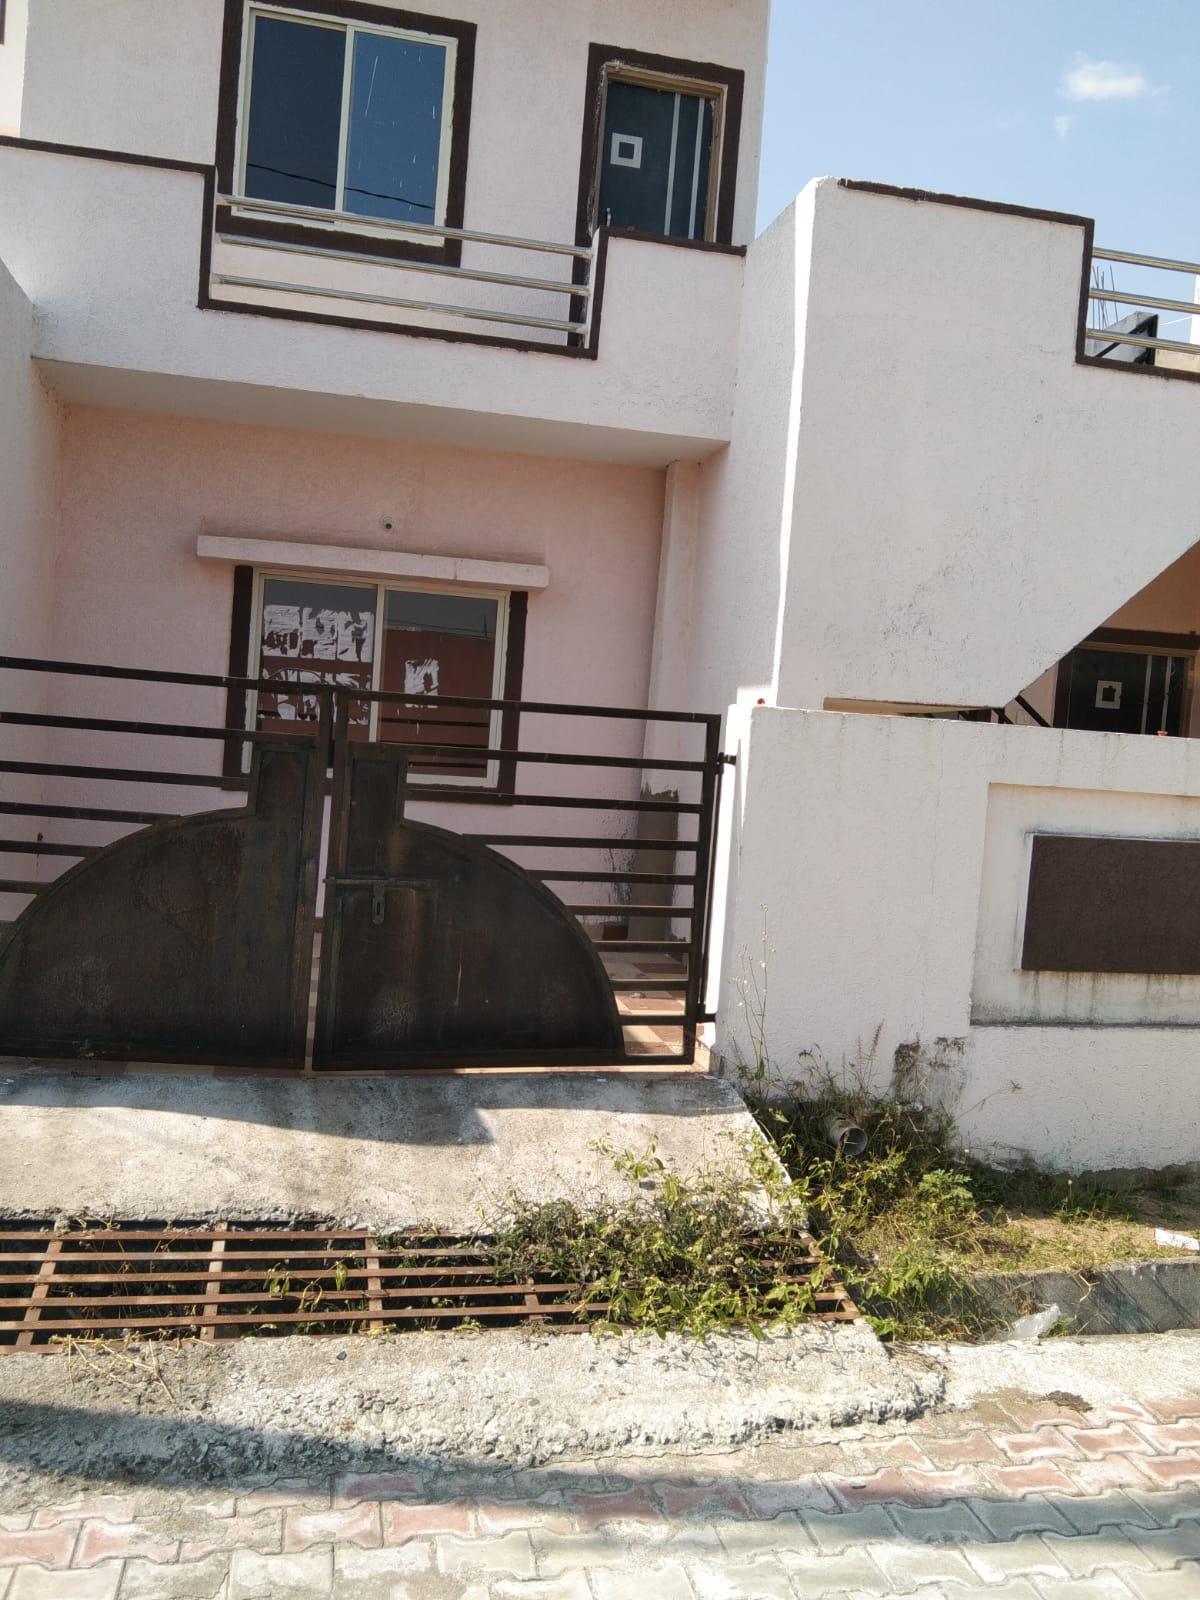 3 Bed/ 3 Bath Sell House/ Bungalow/ Villa; 850 sq. ft. carpet area; 2,540 sq. ft. lot for sale @Shanti enclave society 